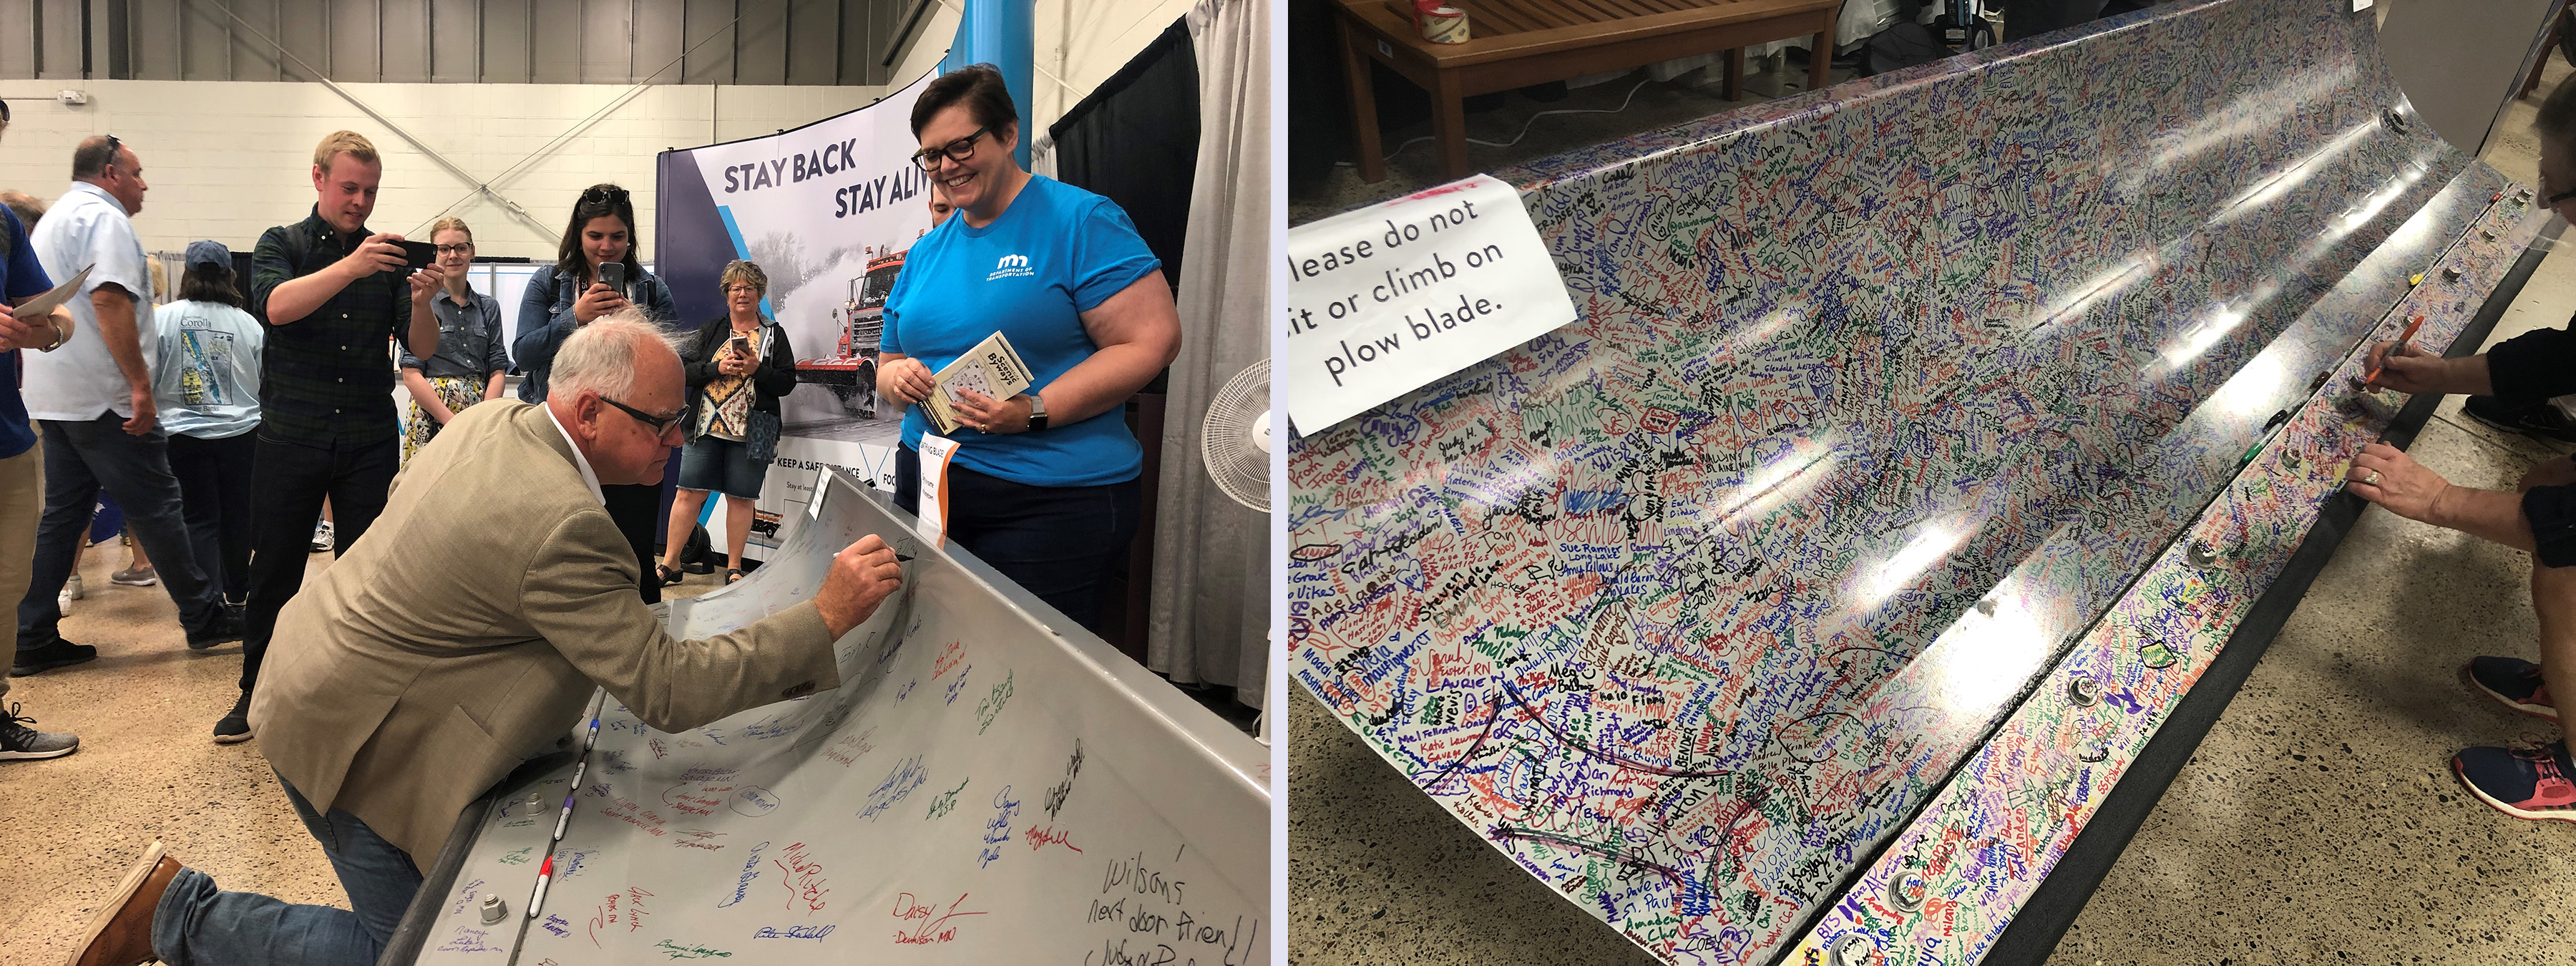 At left, Gov. Tim Walz signs the plow blade at the Minnesota State Fair, at right, a close-up photo of the hundreds of signatures, in different colors, left on a different blade.